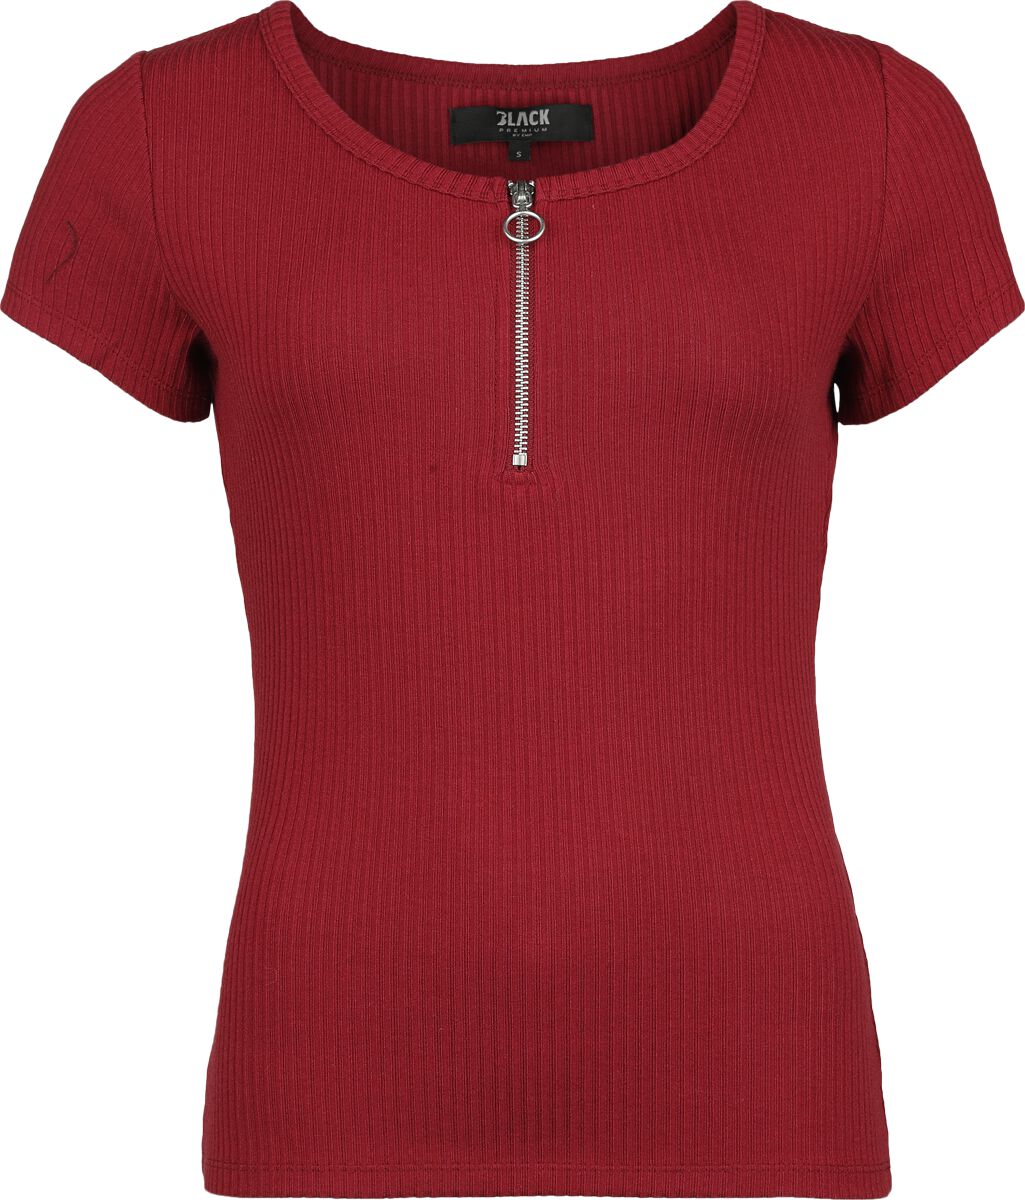 Image of T-Shirt di Black Premium by EMP - Ribbed T-shirt with zipper - S a XXL - Donna - bordeaux